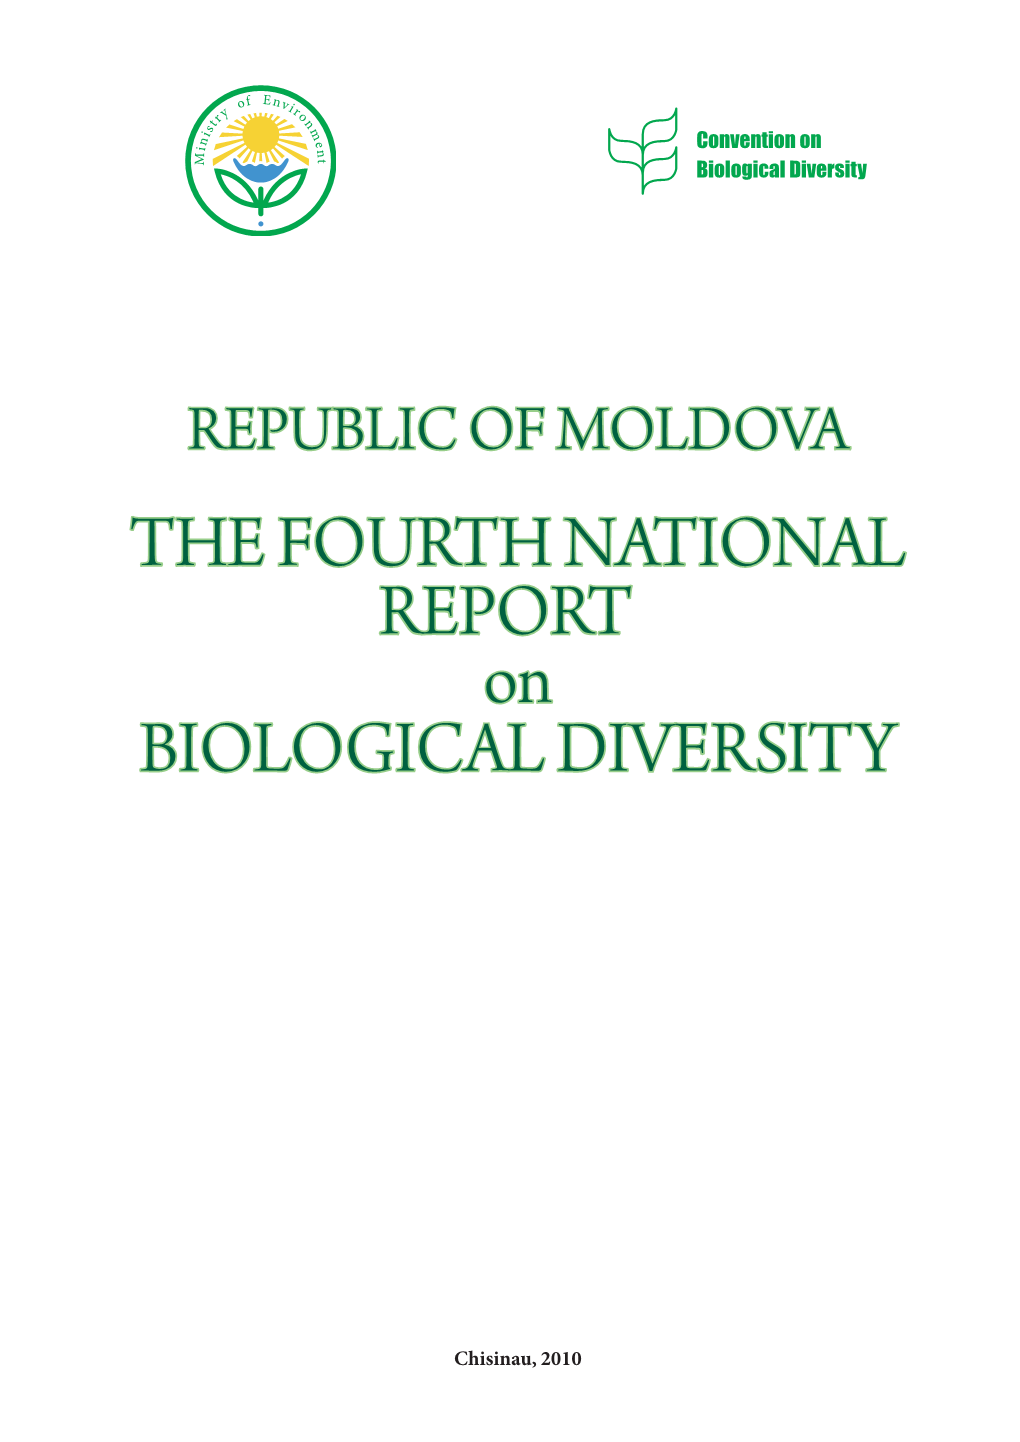 THE FOURTH NATIONAL REPORT on BIOLOGICAL DIVERSITY